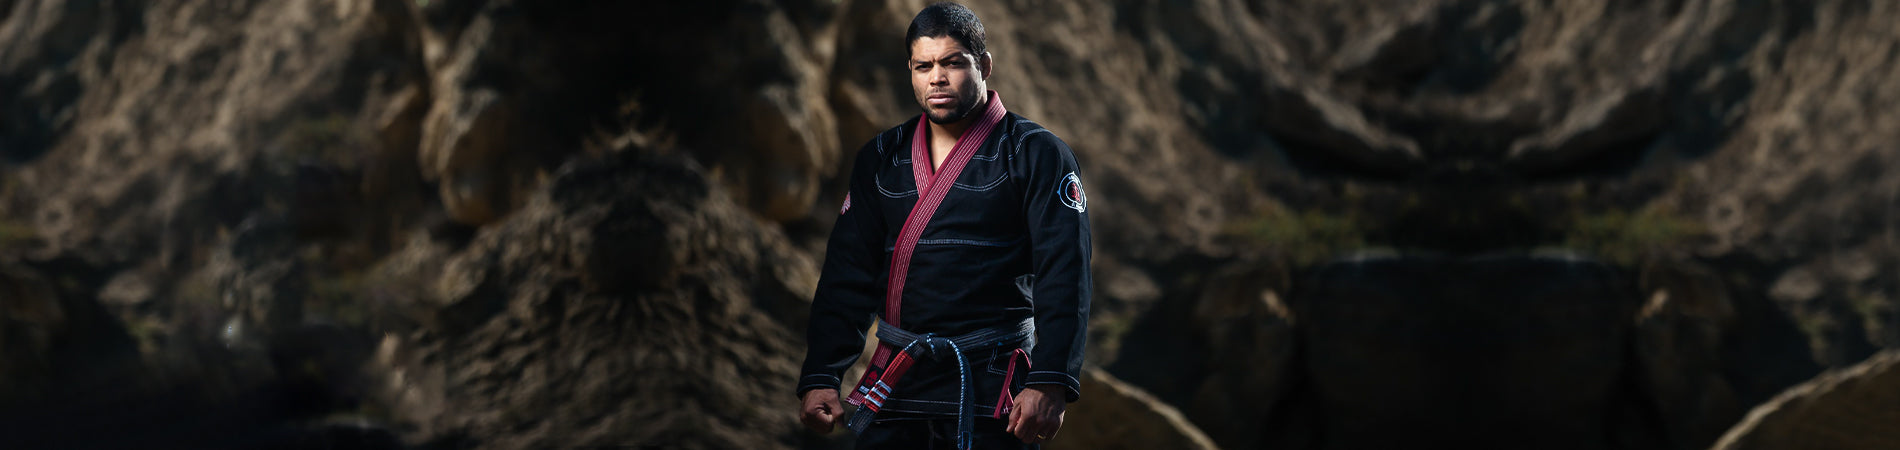 Andre Galvao – “Deco” The King of Grappling